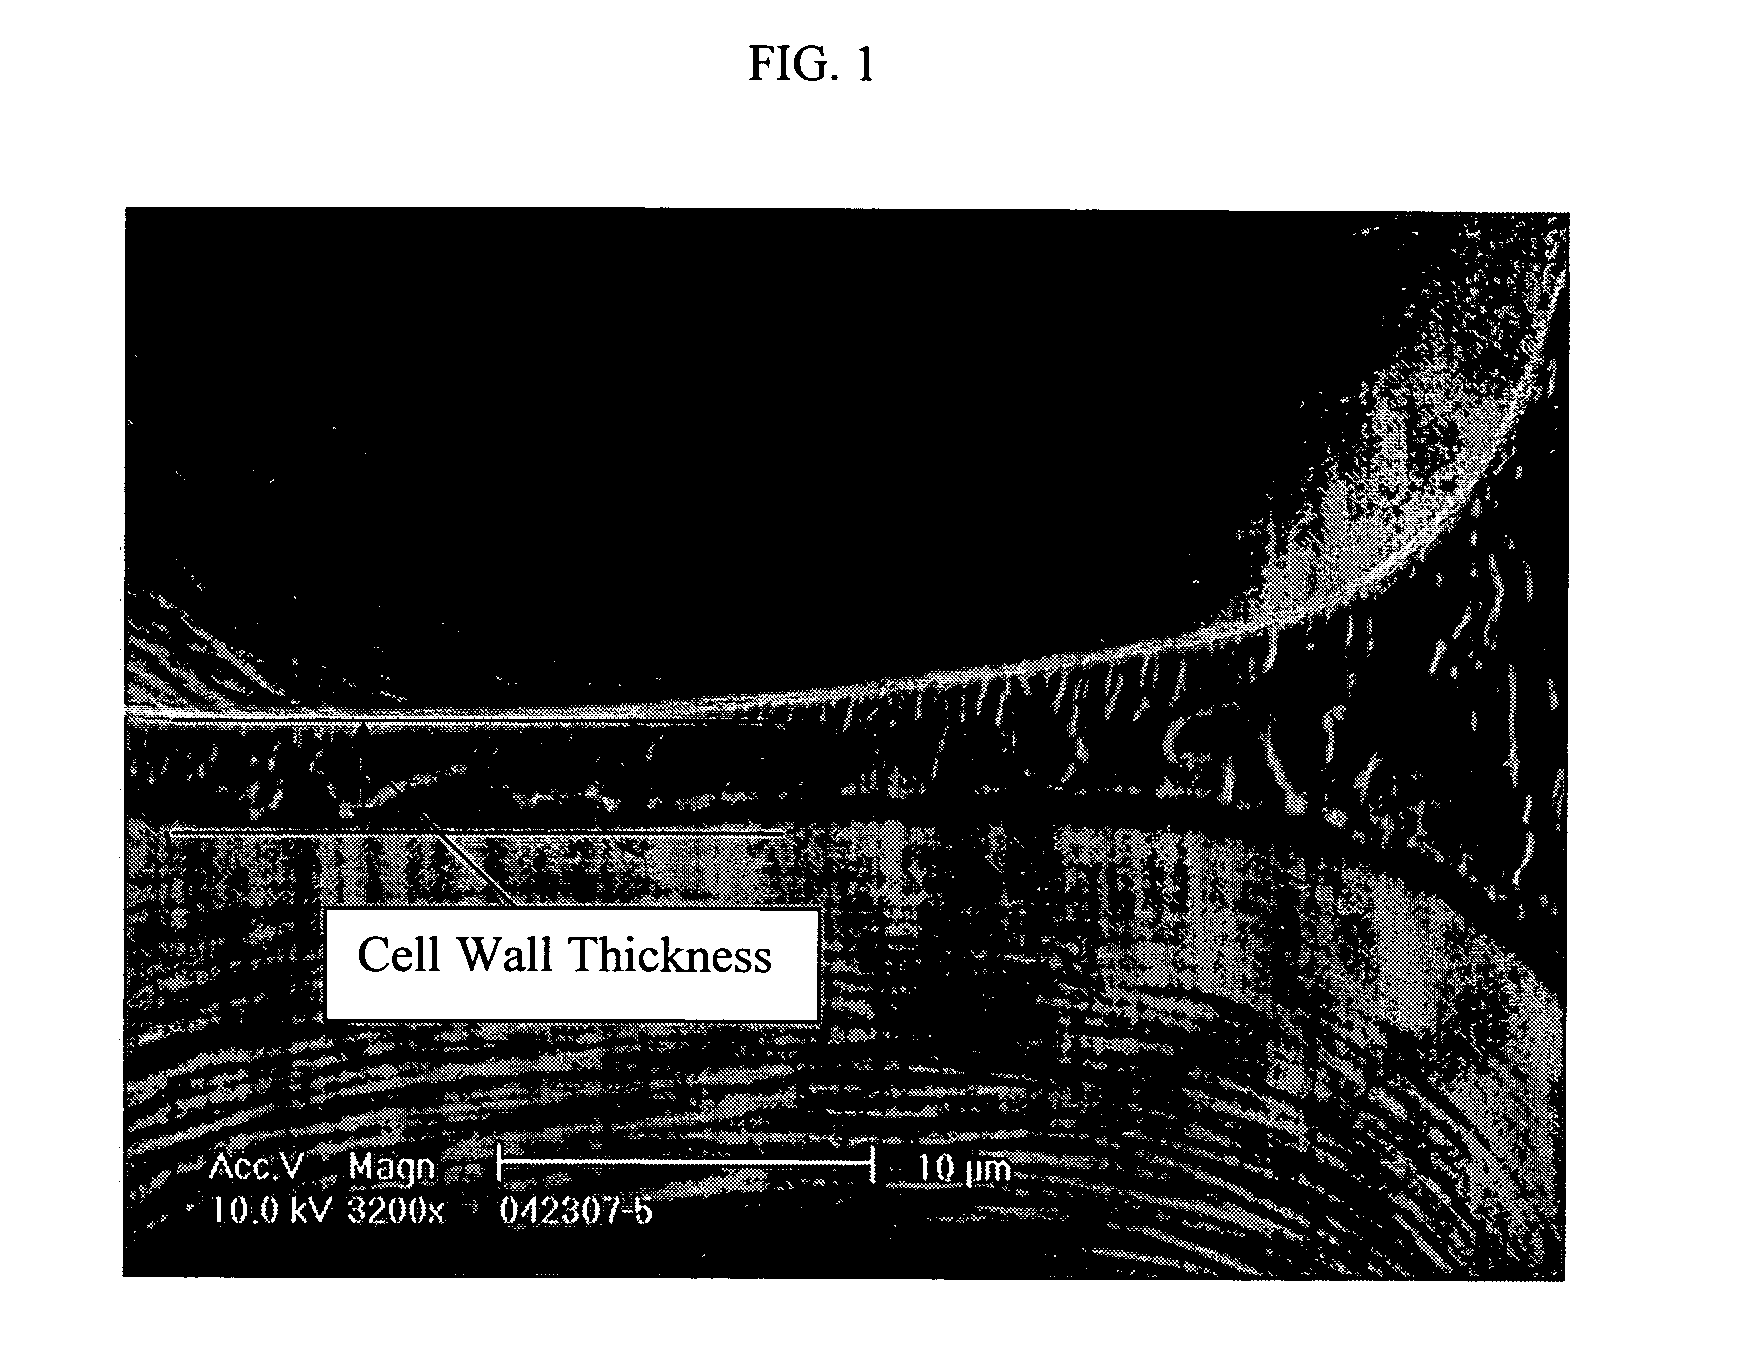 Method of forming thermoplastic foams using nano-particles to control cell morphology